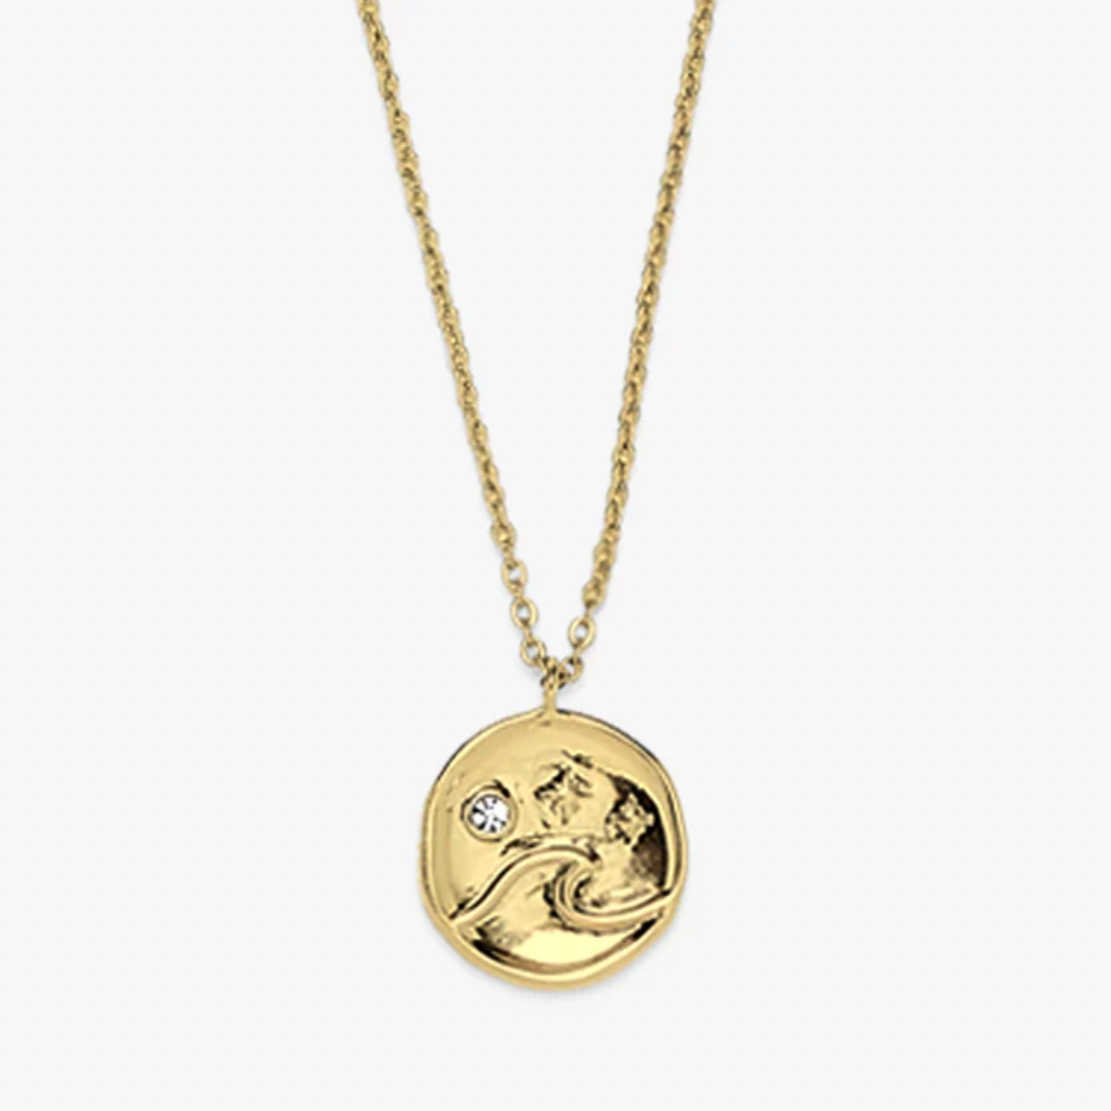 CRYSTAL WAVE COIN NECKLACE GOLD